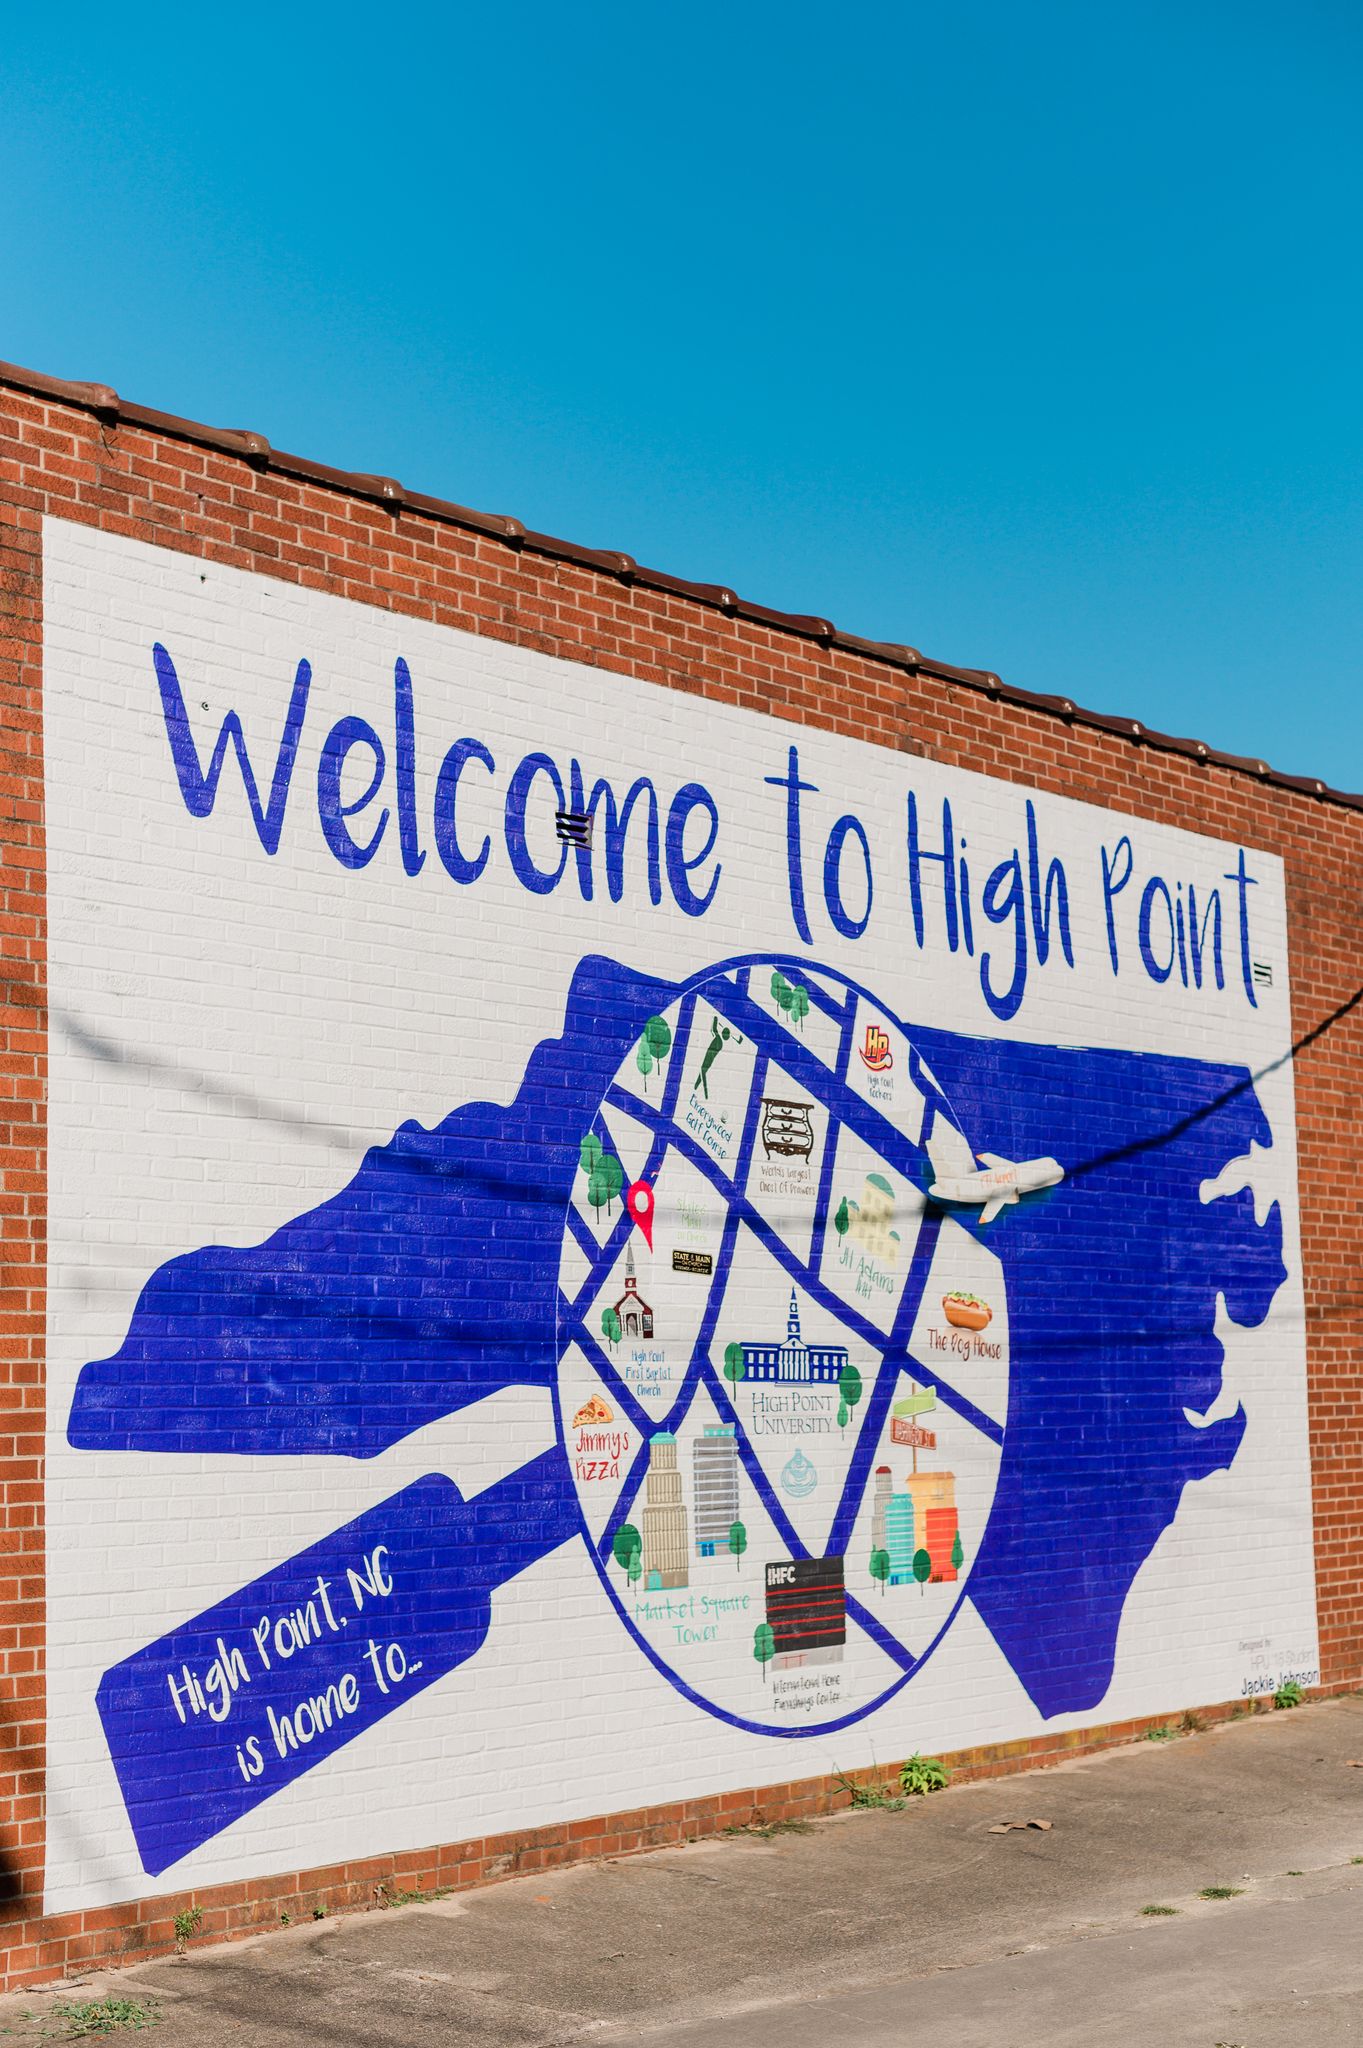 A mural that says "Welcome to High Point." A purple shape of North Carolina has a circle painted over it with specific locations to High Point. 